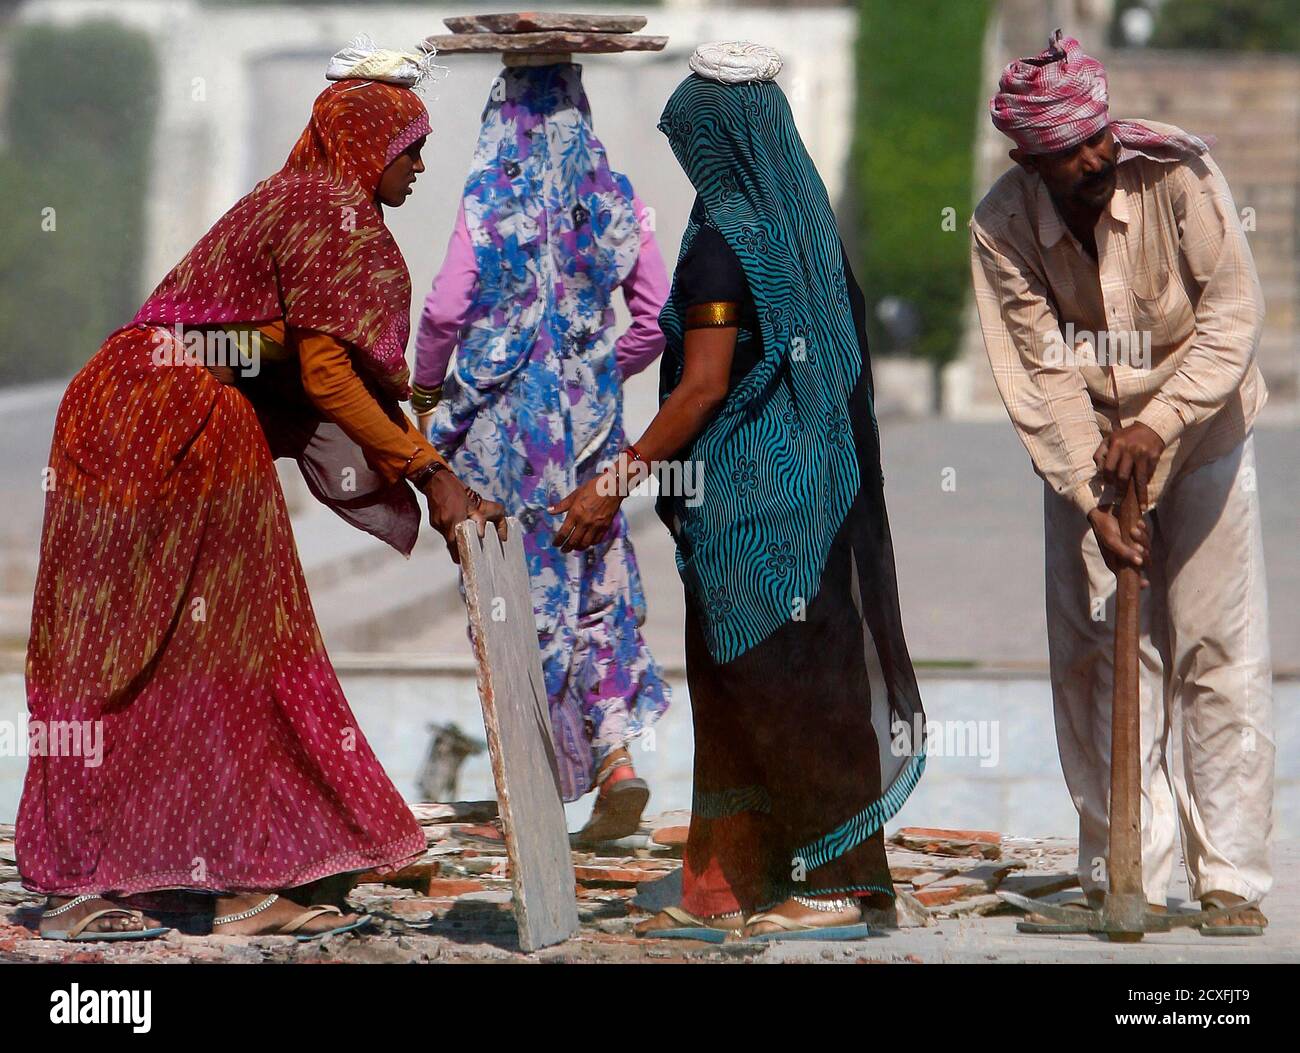 A family of labourers remove flooring during renovation work at the Yadavindra gardens in the town of Pinjore, 20km (12 miles) from the northern Indian city of Chandigarh September 30, 2010.  REUTERS/Andrew Caballero-Reynolds (INDIA - Tags: SOCIETY) Stock Photo